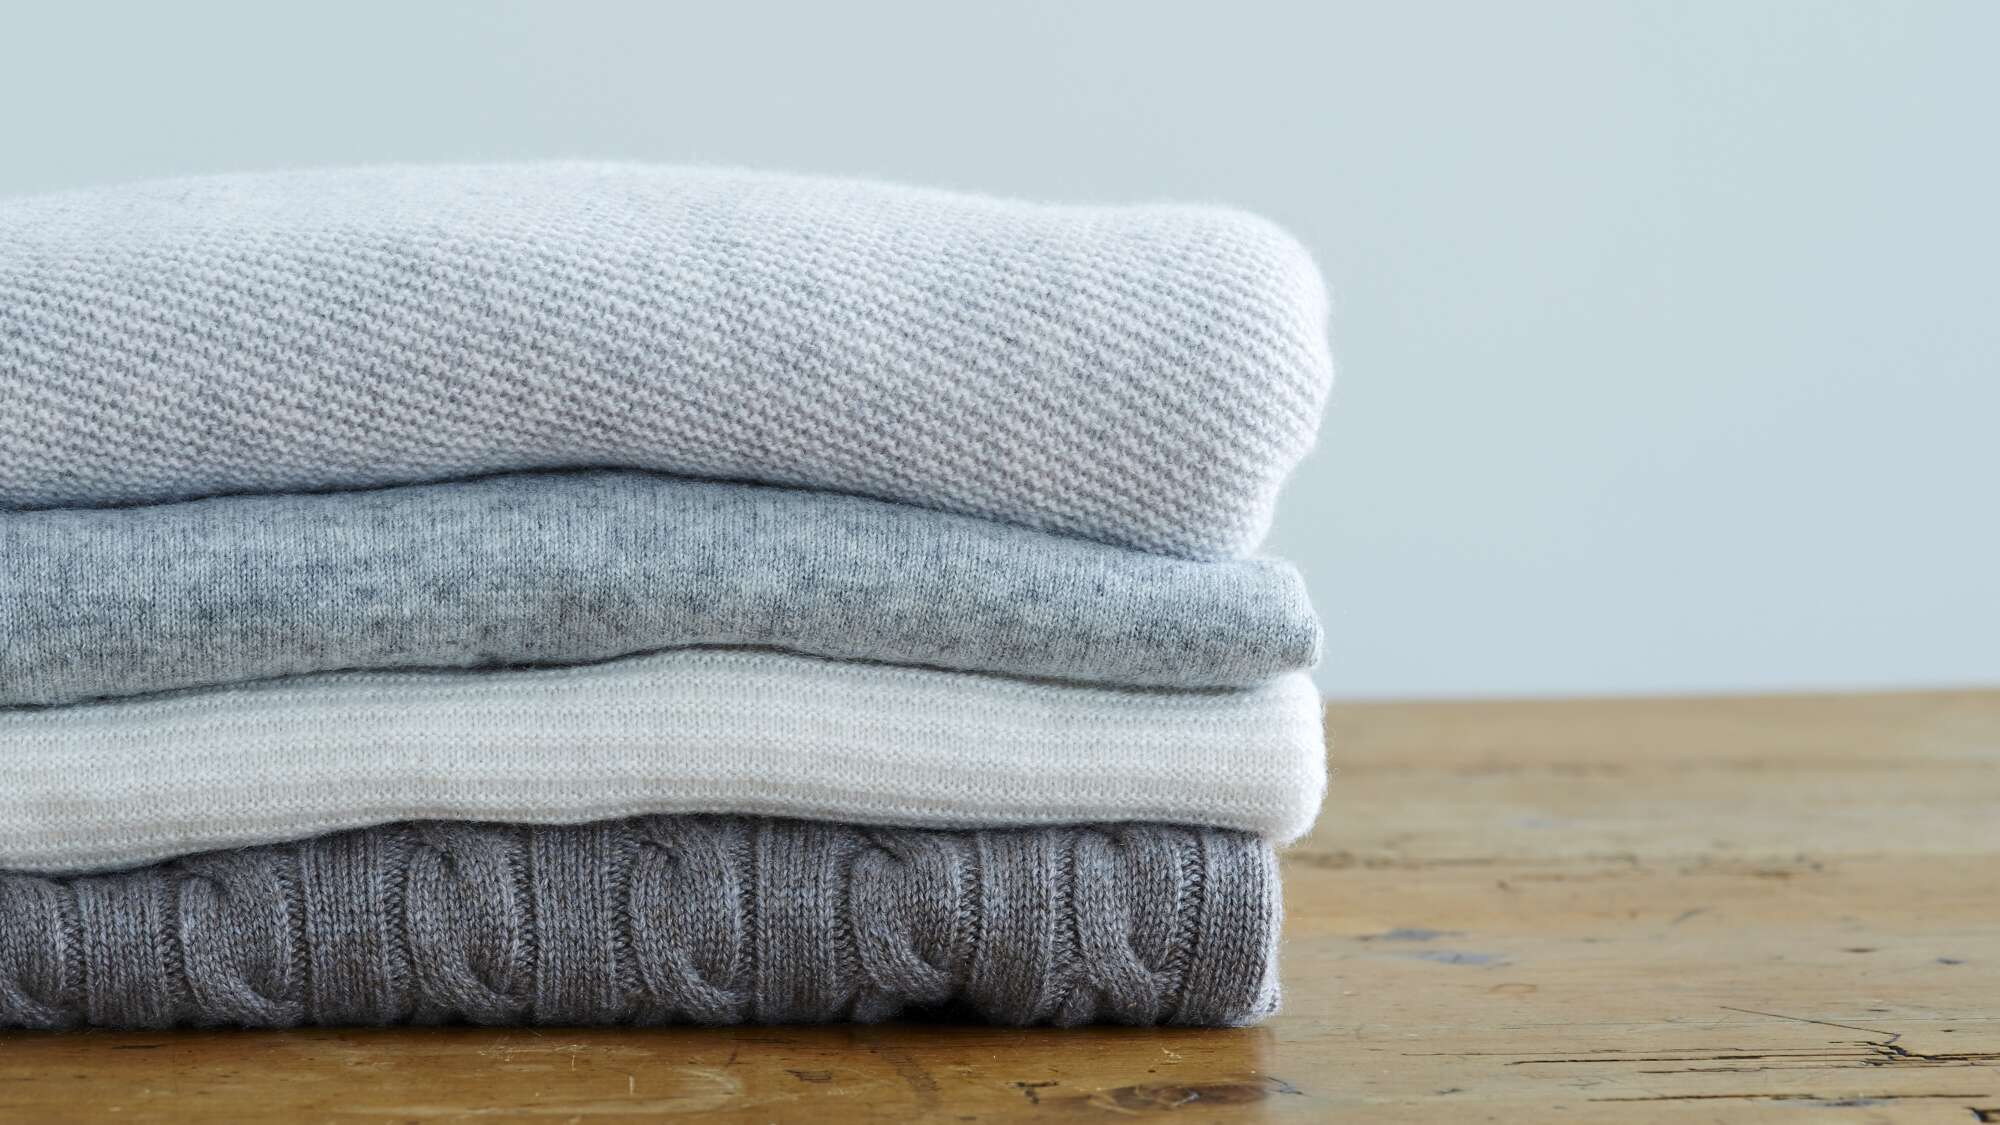 What Are The Benefits Of Wearing Sweaters Made From Cashmere?